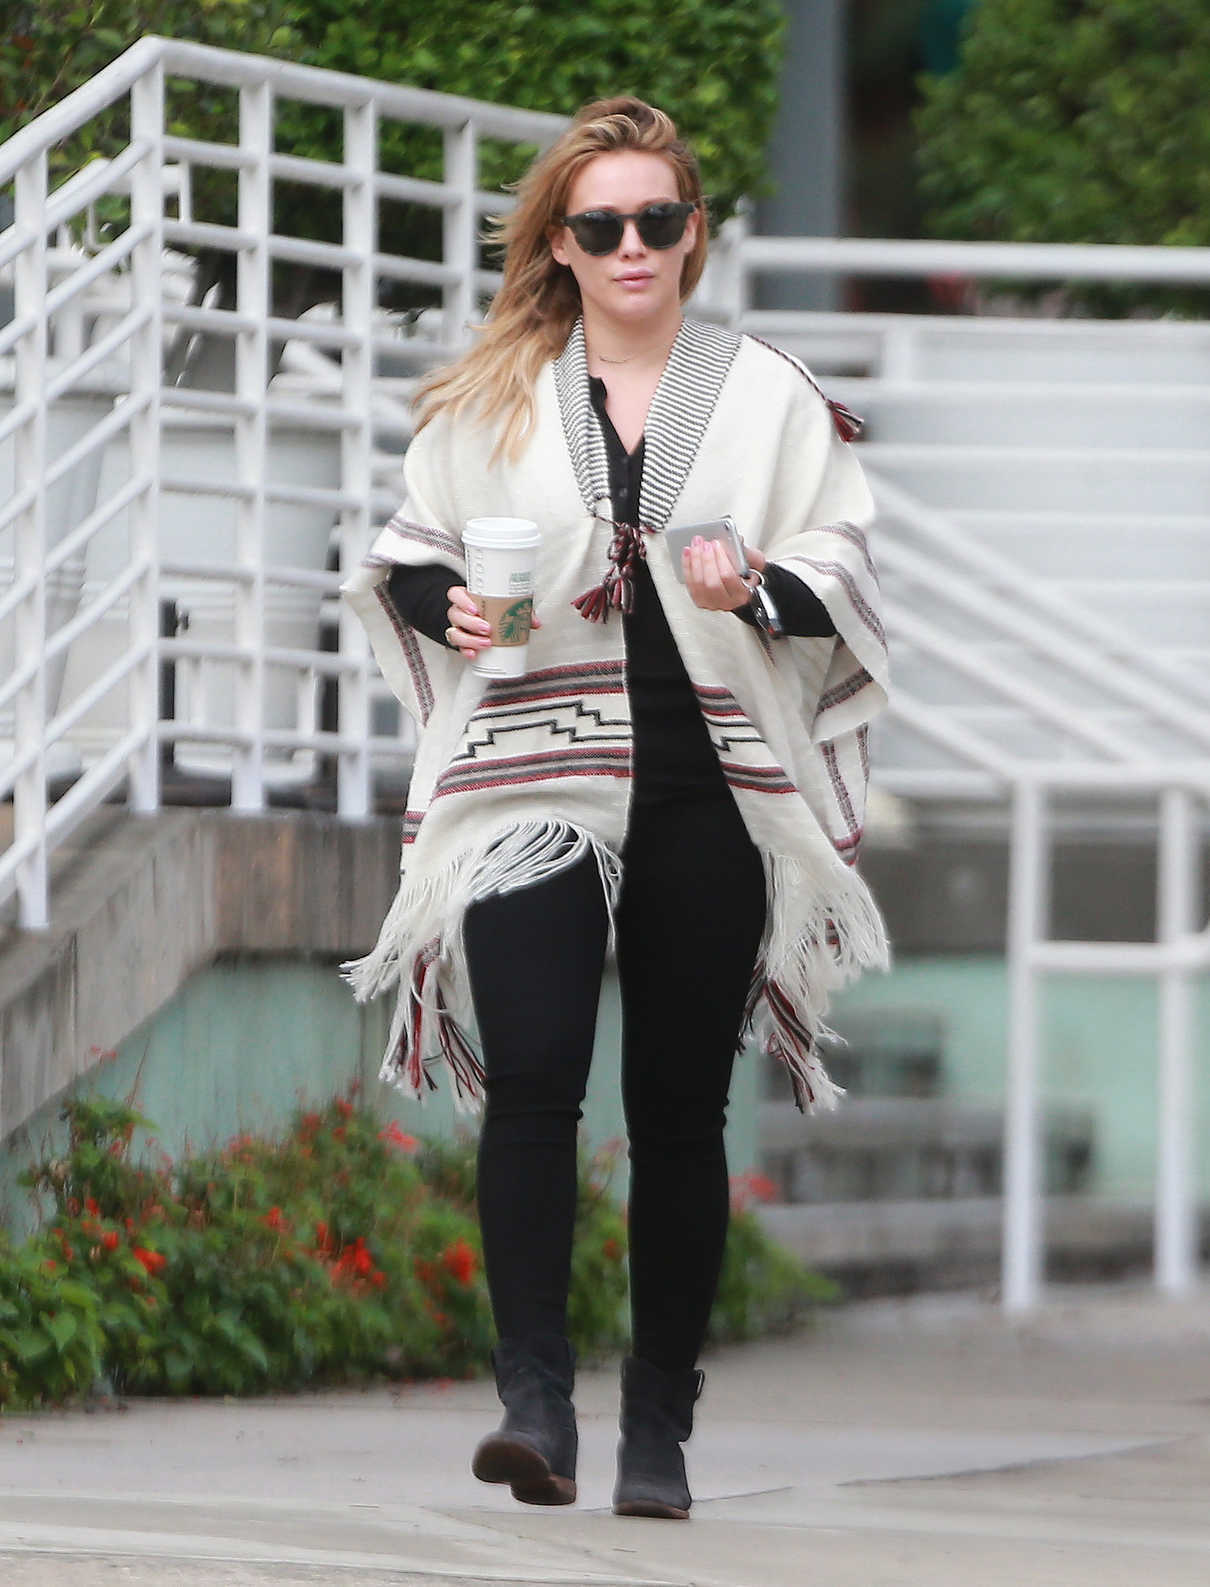 Hilary Duff Gets Her Morning Coffee in Studio City 10/17/2016-4